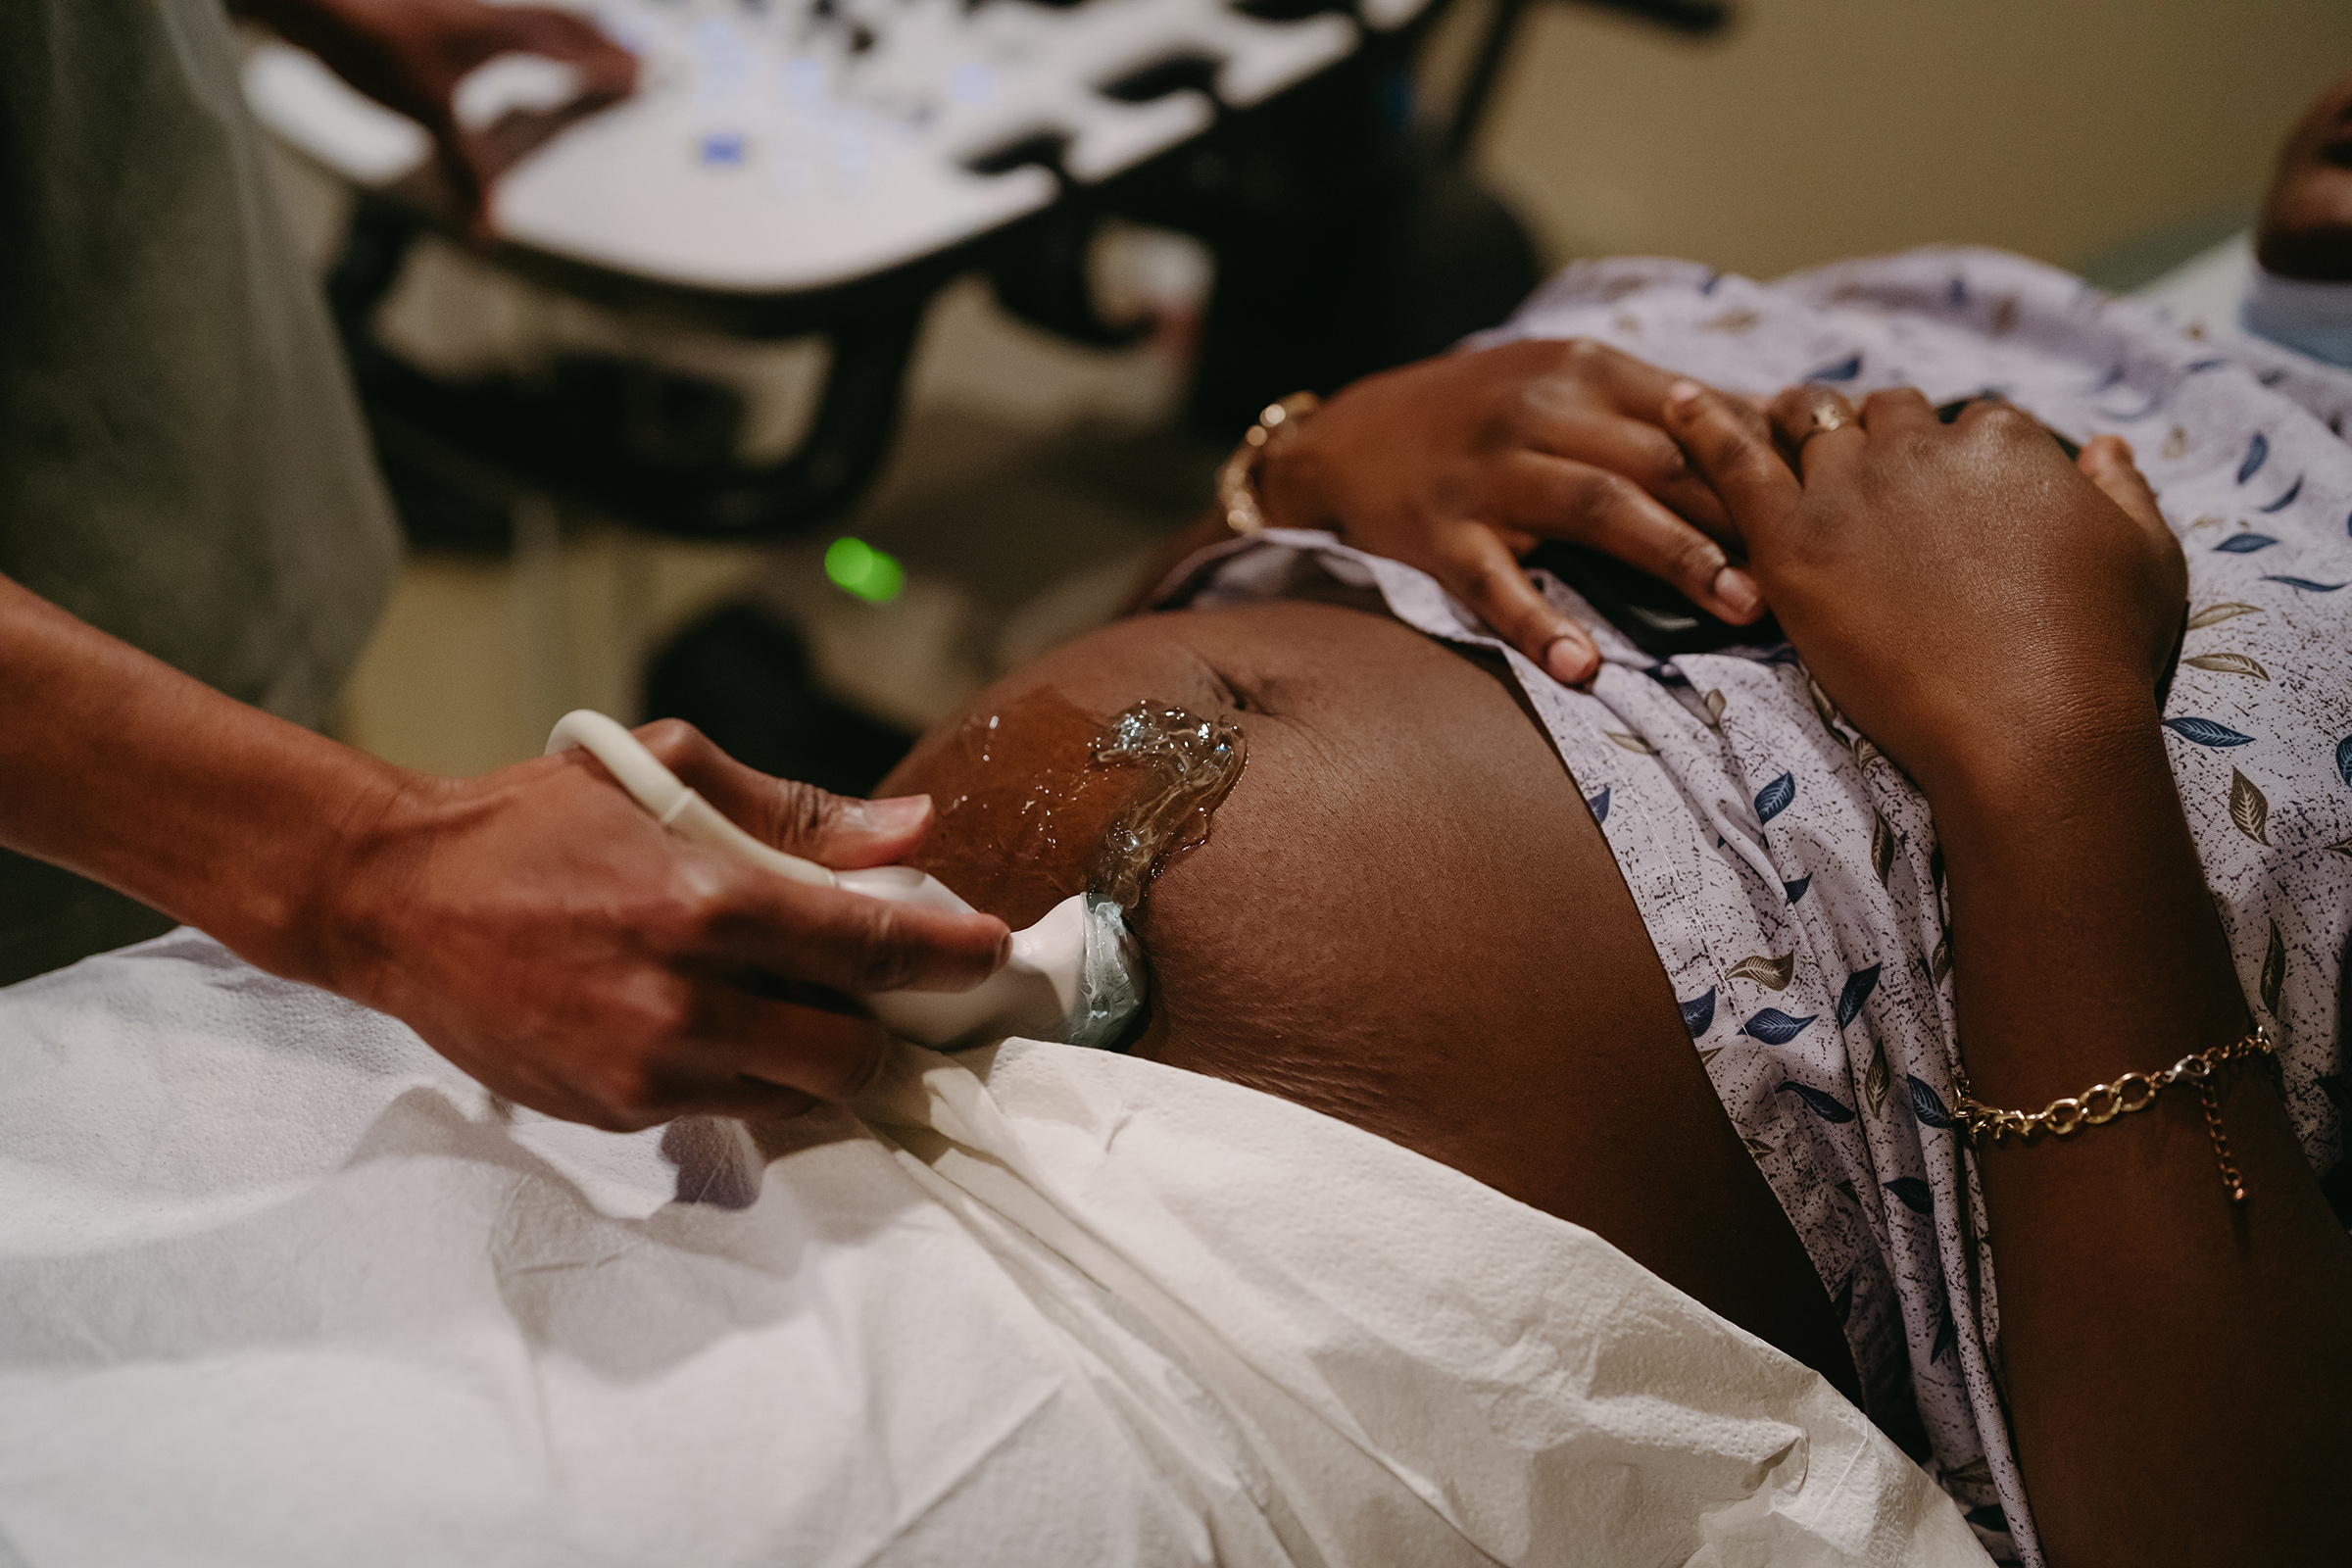 Dr. Balthrop performs an ultrasound on a patient who is 14 weeks pregnant. (Lucy Garrett for TIME)